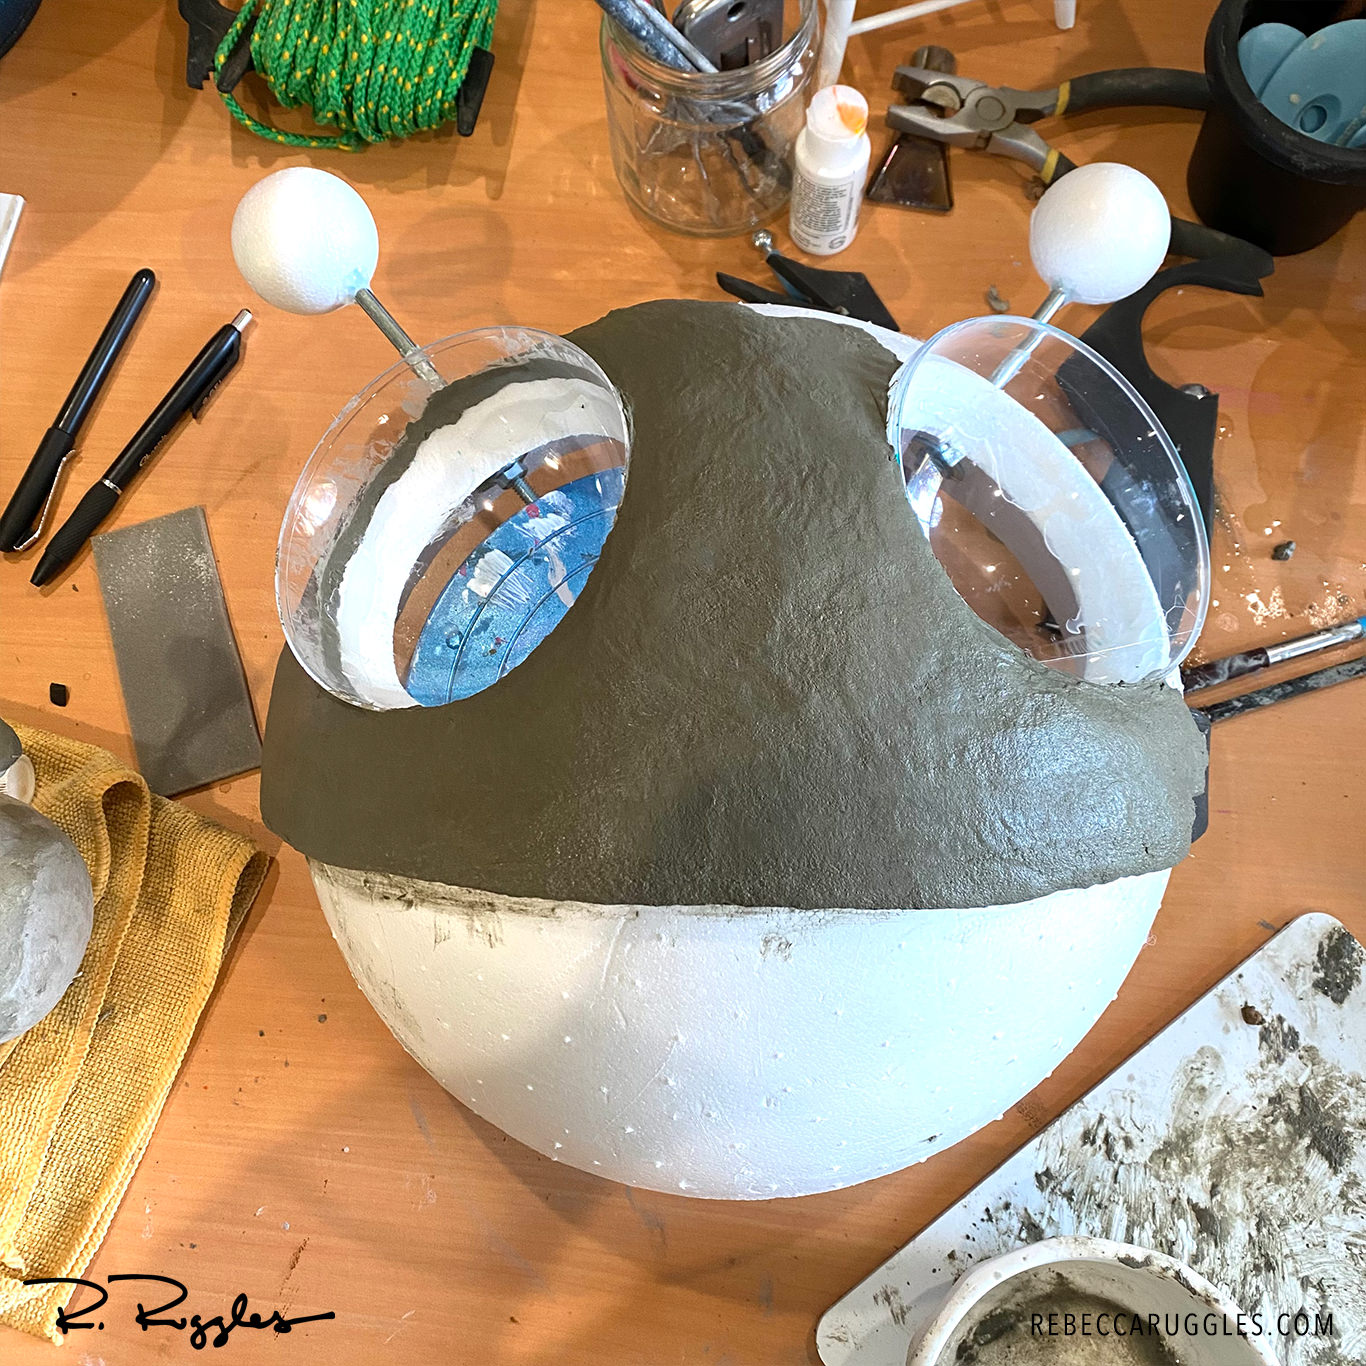 Adding wet concrete paper clay to the alien head armature with trowel.